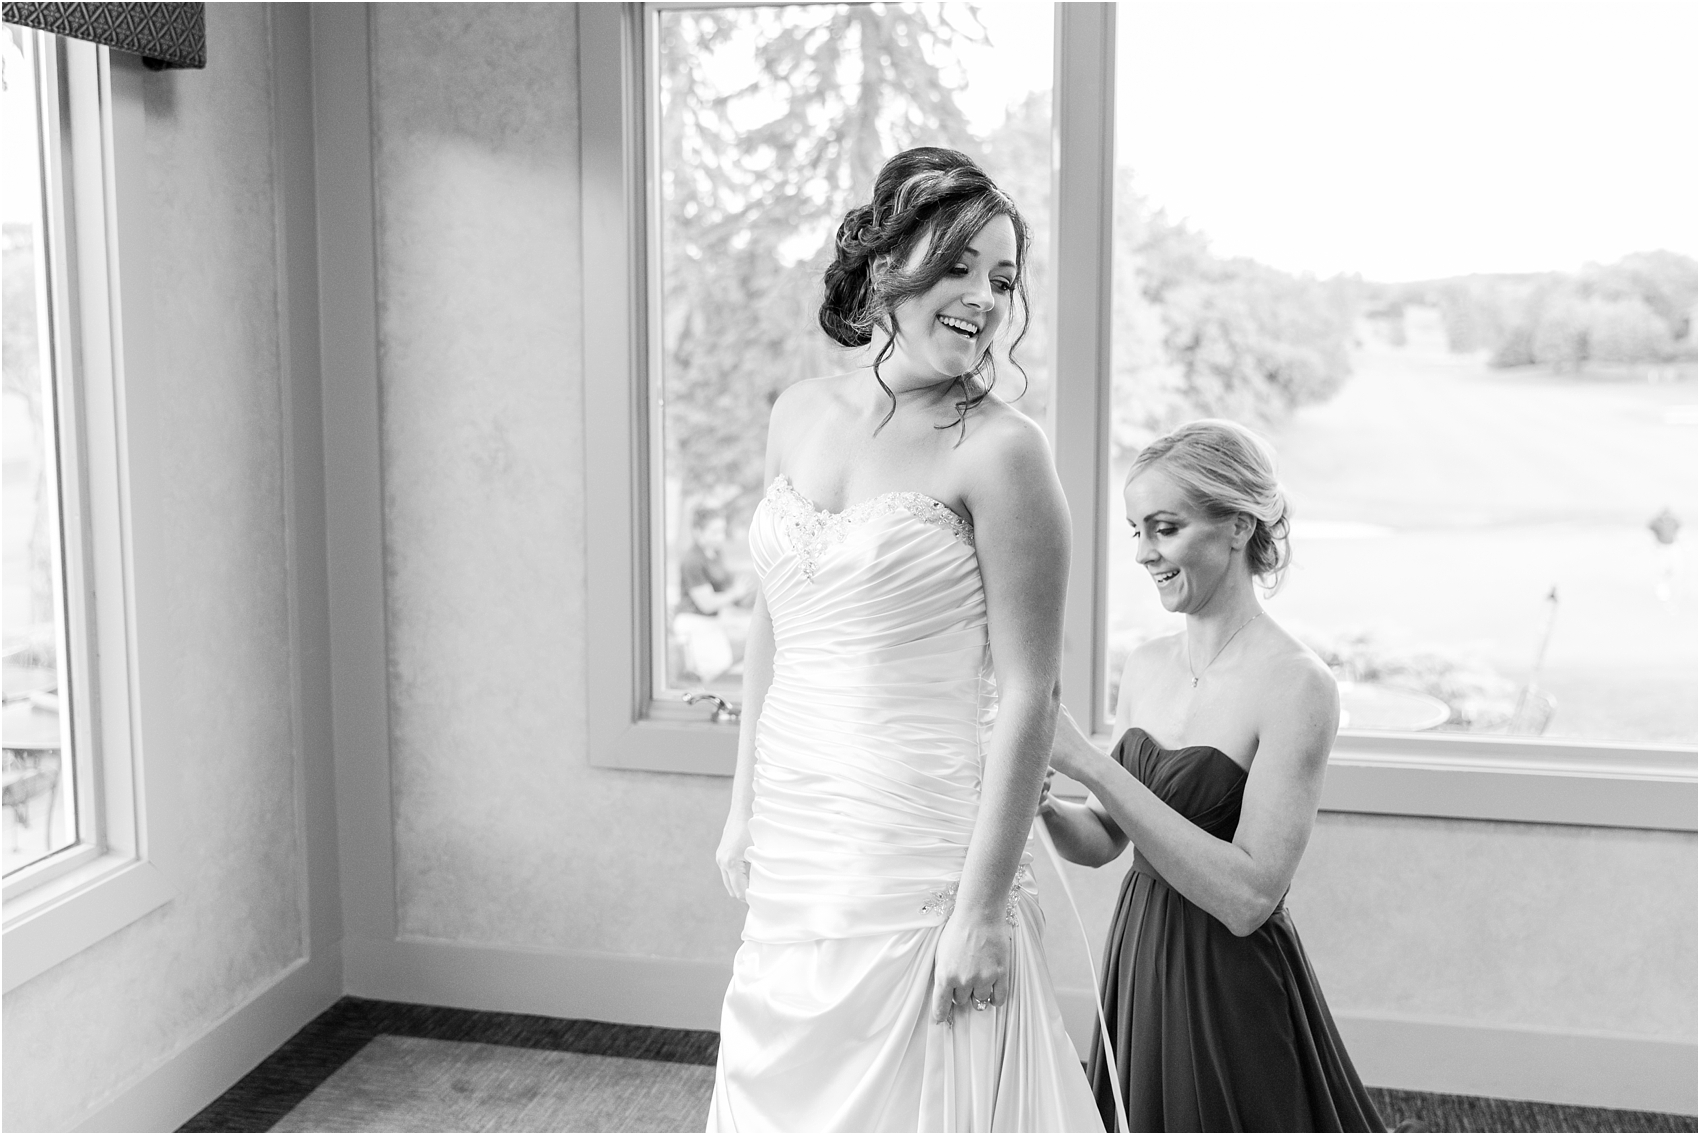 classic-wedding-photos-at-great-oaks-country-club-in-rochester-hills-mi-by-courtney-carolyn-photography_0016.jpg